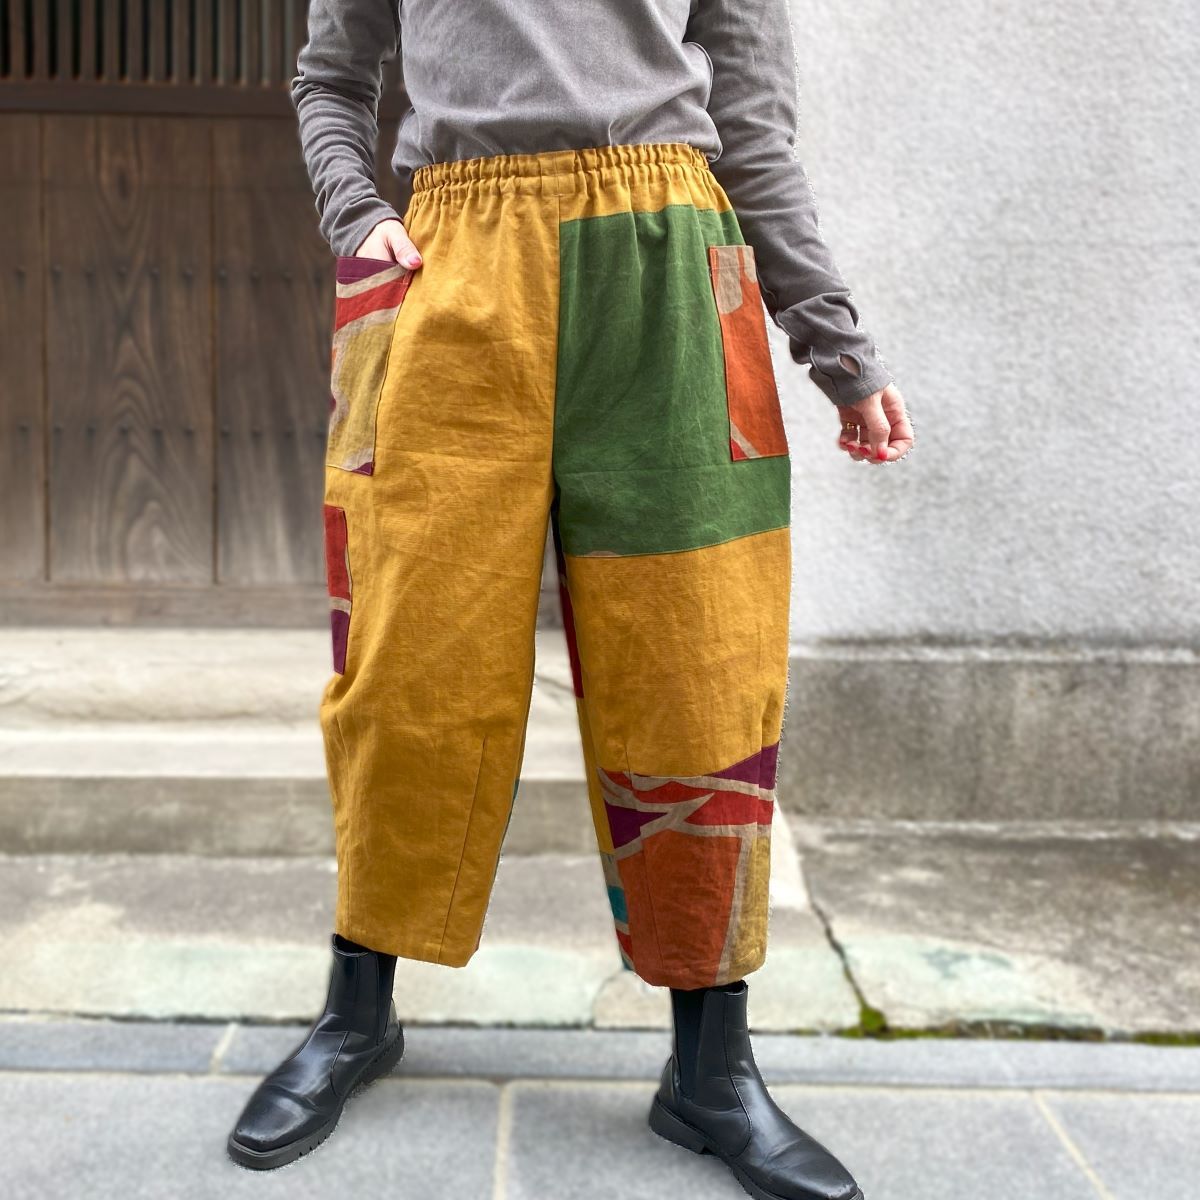 Old Cloth Arrangement Pants] One-of-a-kind piece by the artist, Big C –  こっとんコットン